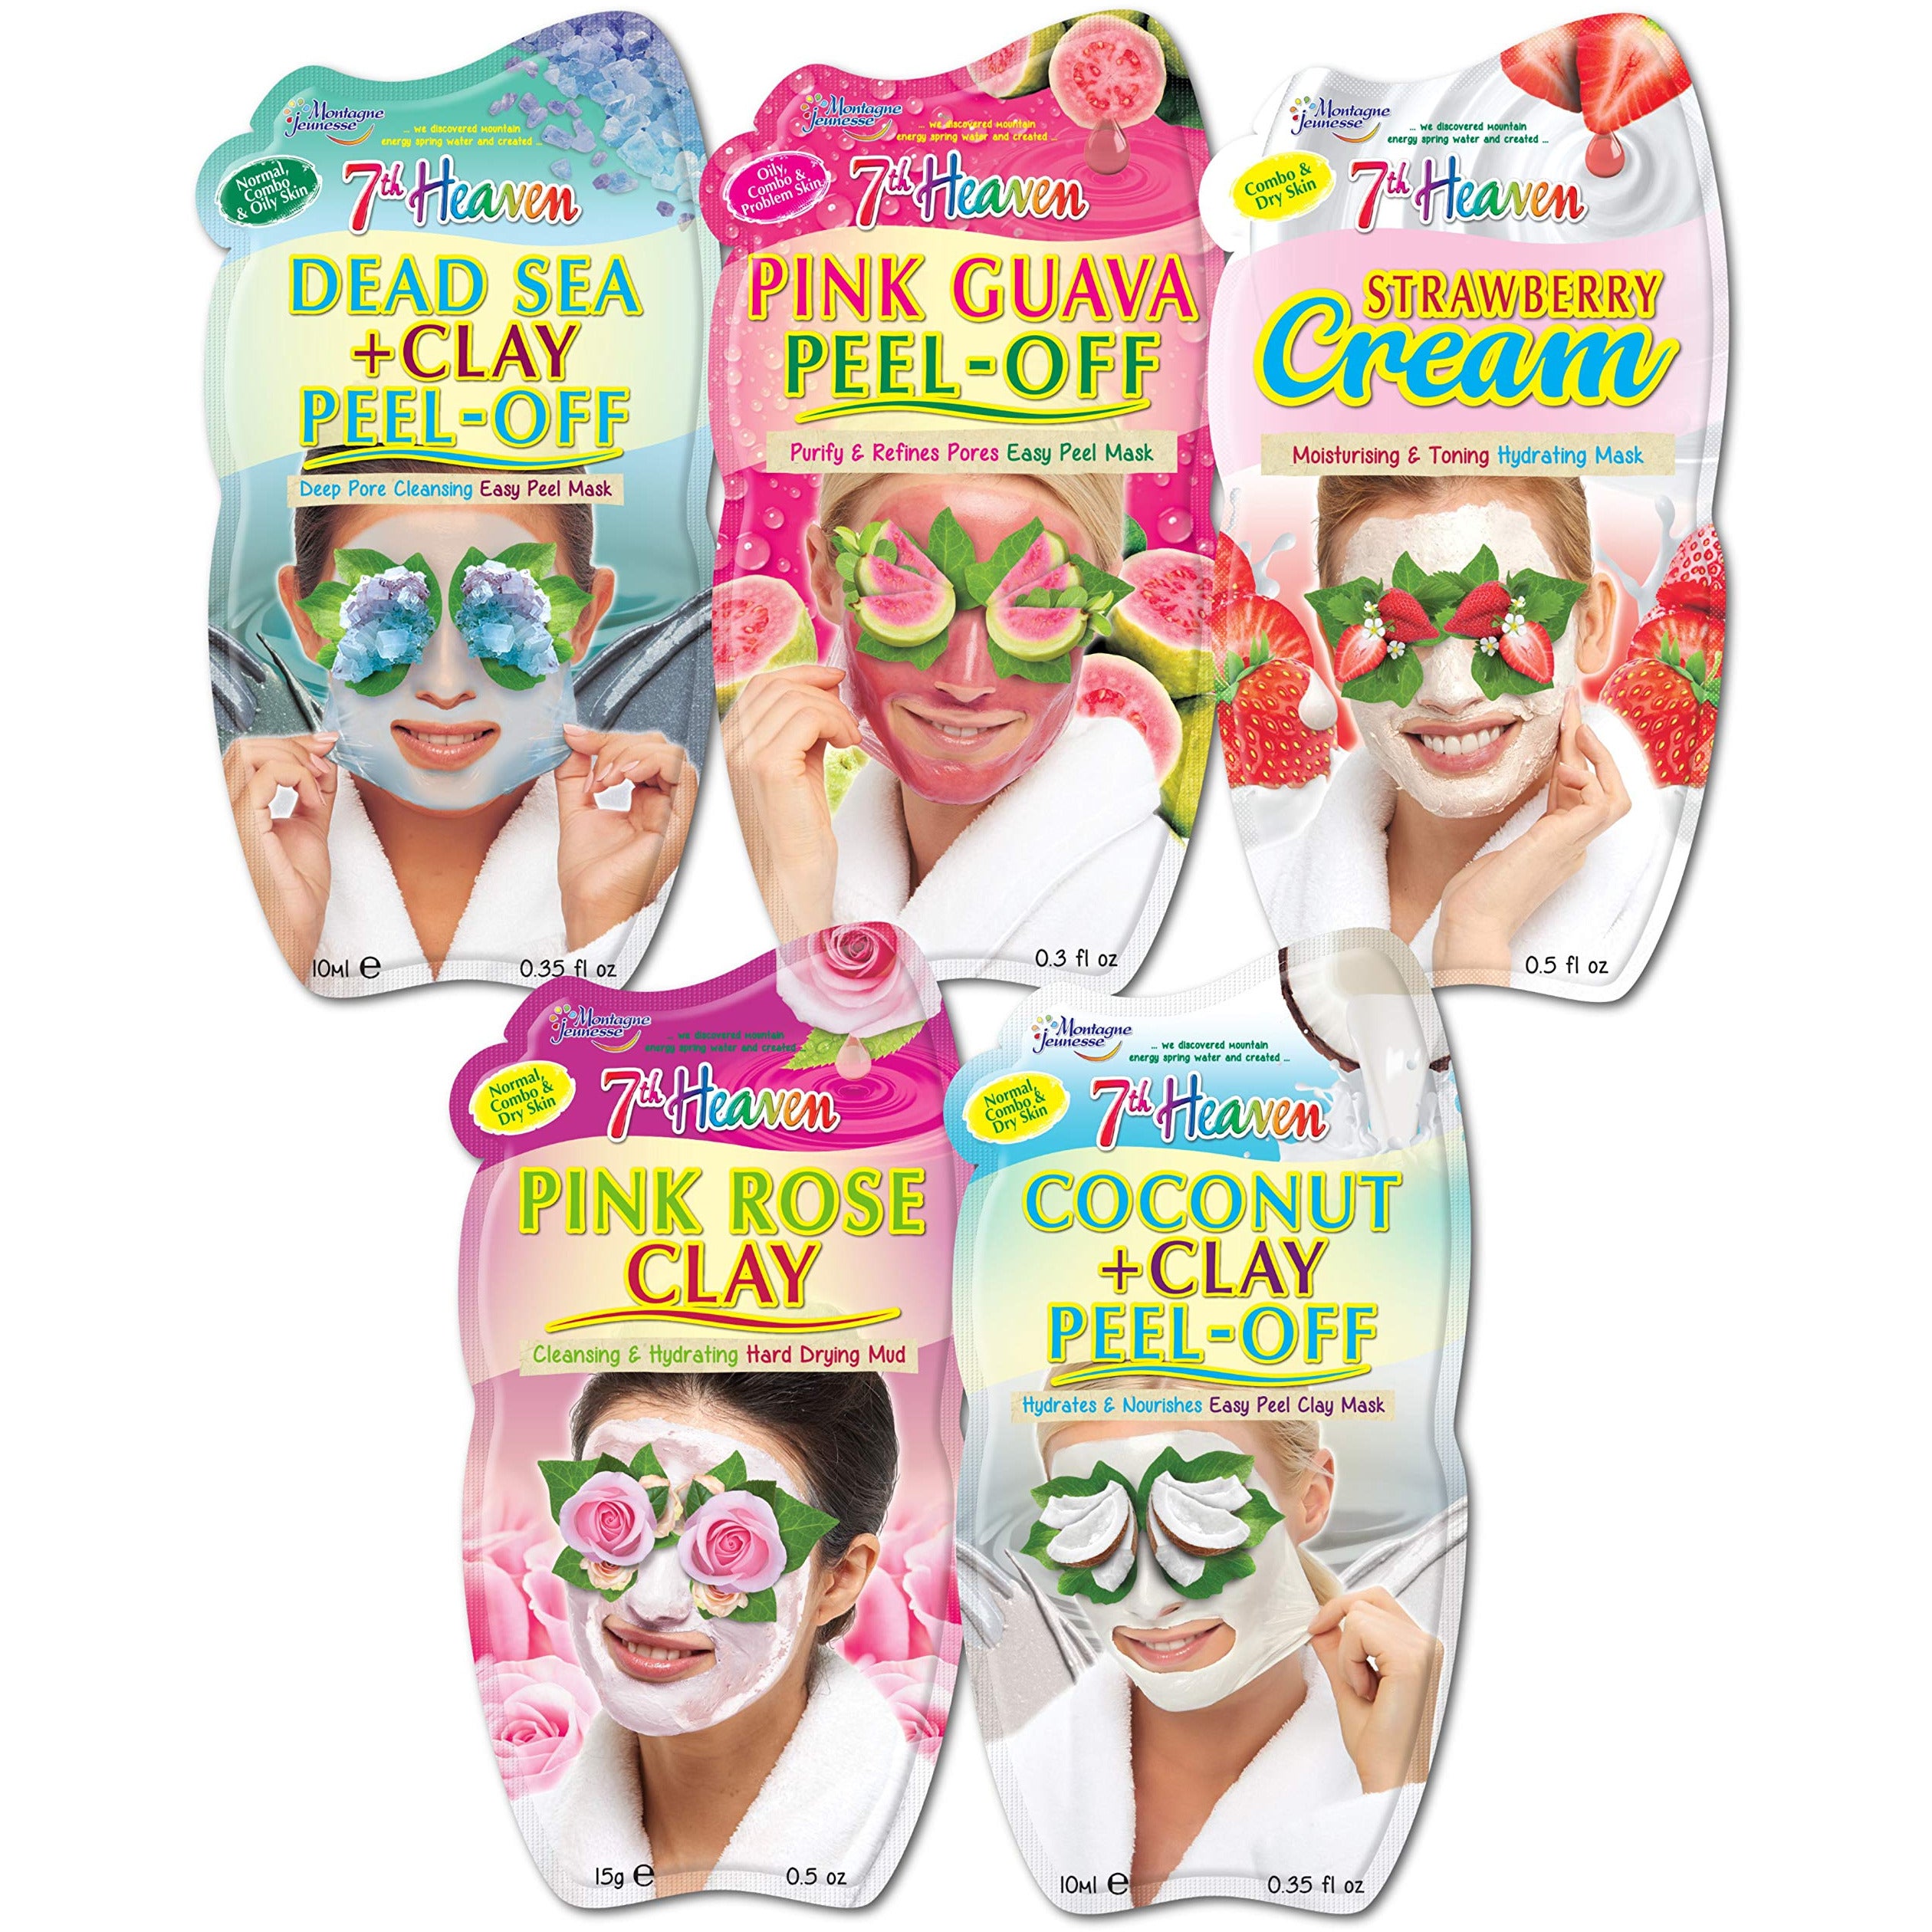 7th Heaven Skincare Pack – Includes 5 Face Masks to Inten – BABACLICK